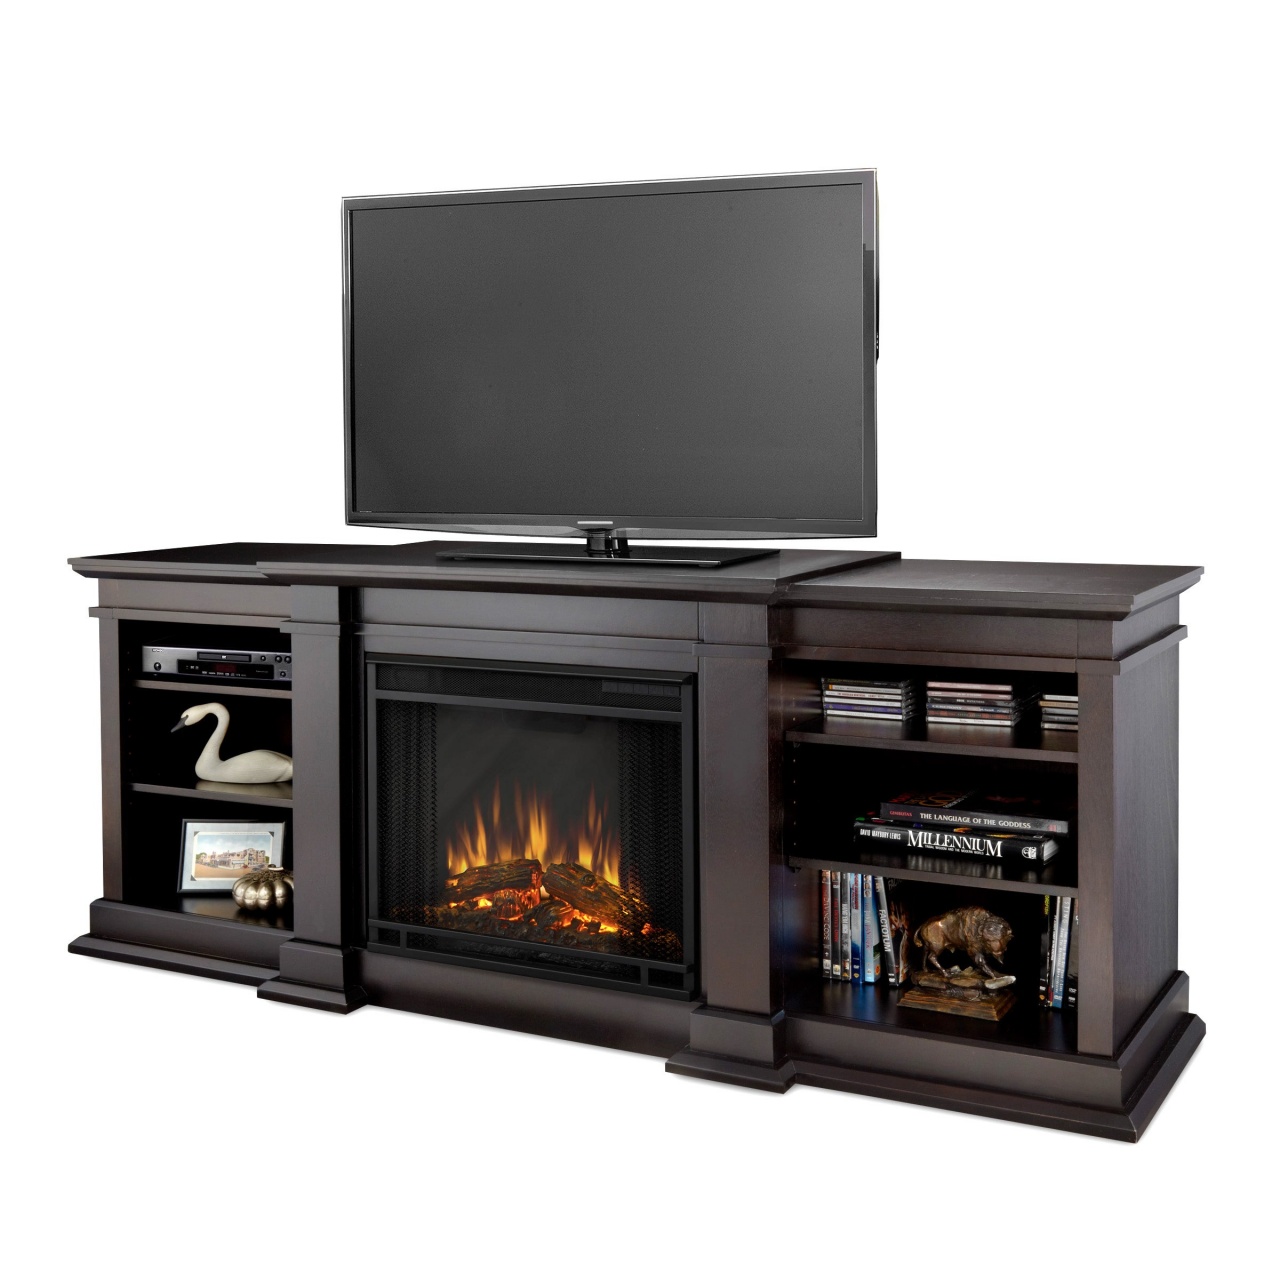 Big Lots Tv Stands Unique How to Make Fireplace More Efficient – Fireplace Ideas From